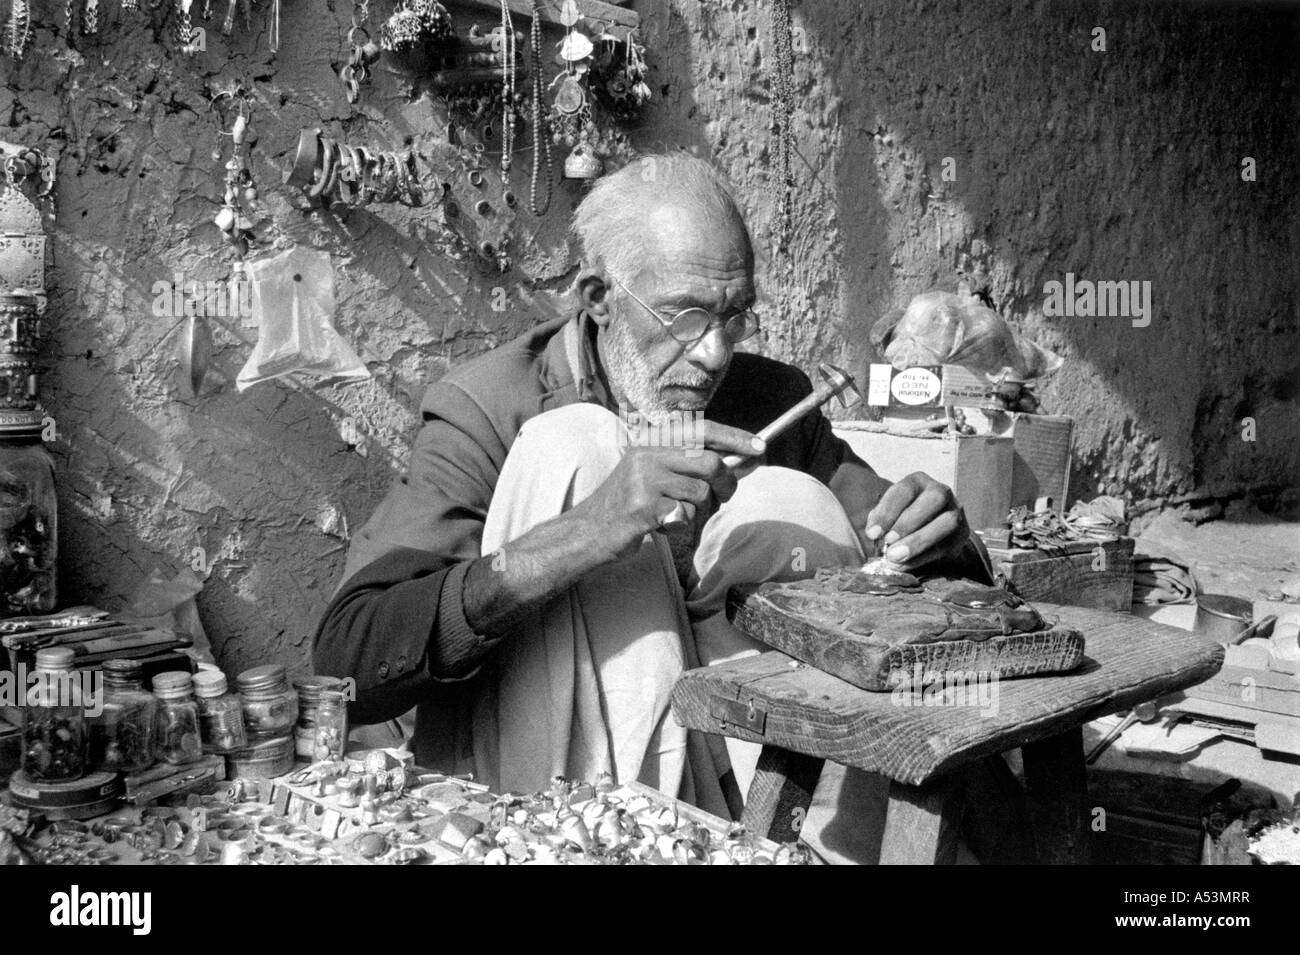 Painet ha1457 288 black and white labor jeweler work kandahar afghanistan country developing nation less economically Stock Photo